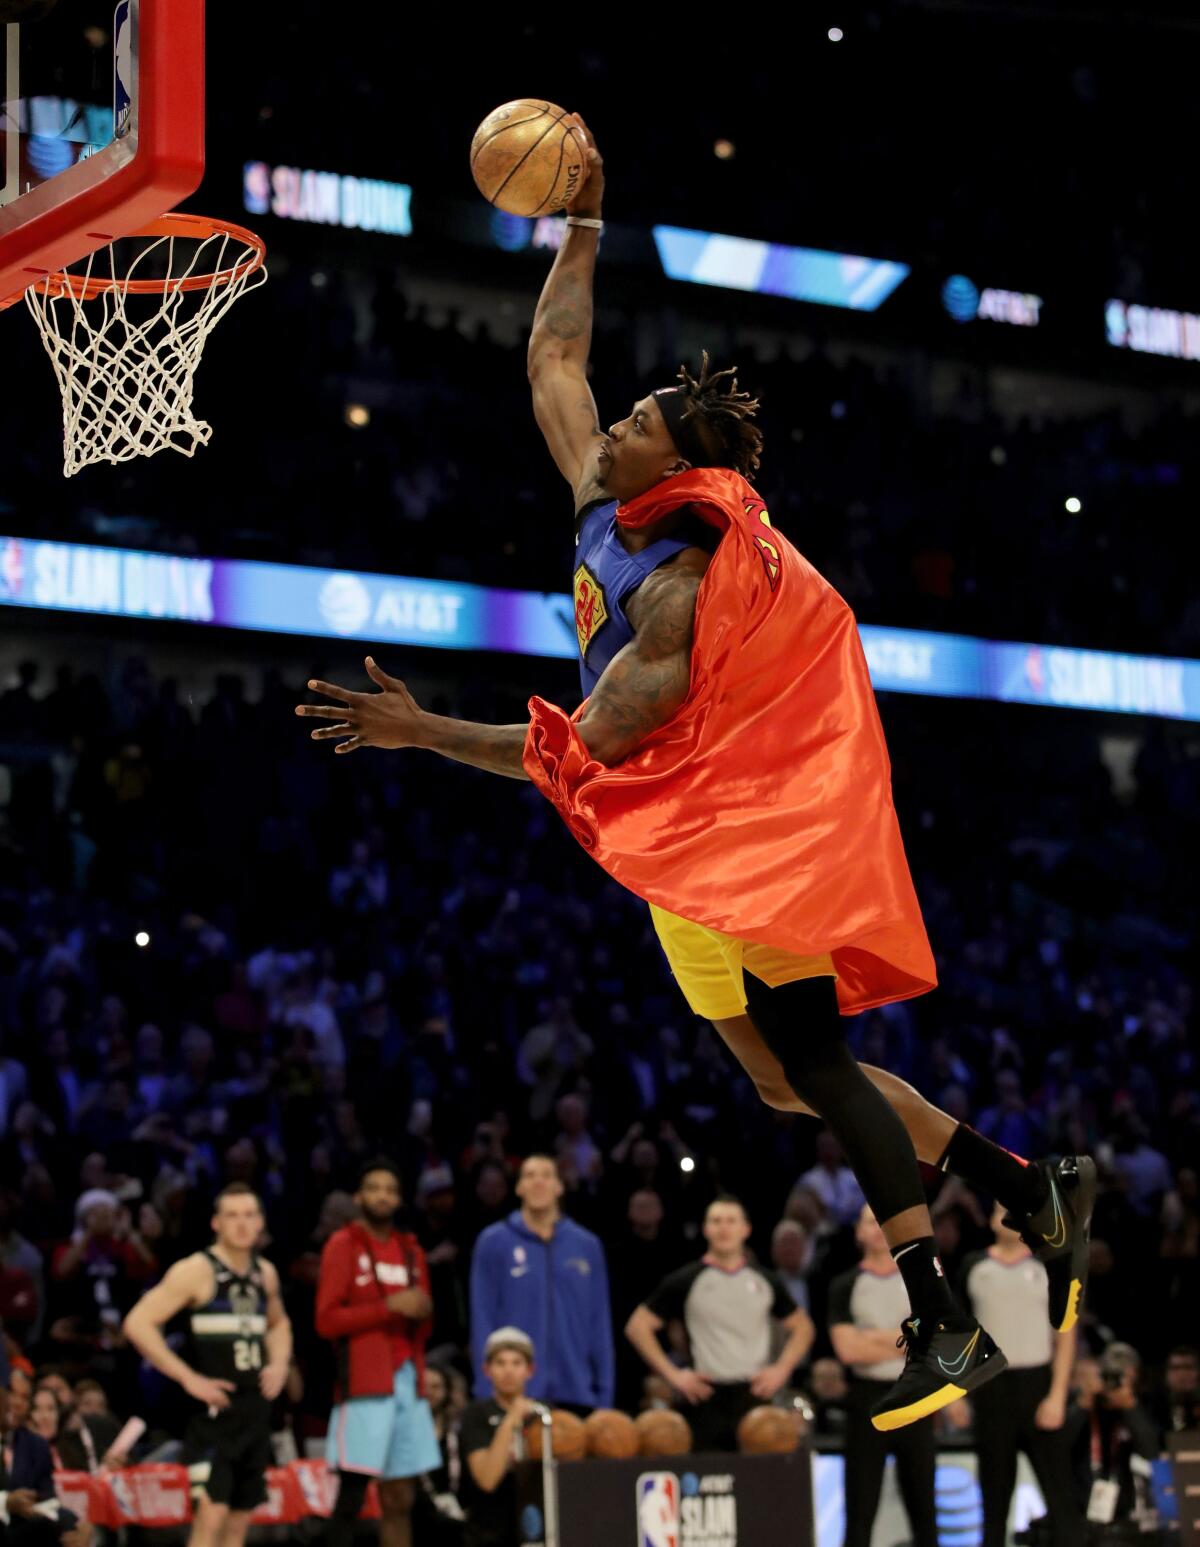 Dwight Howard soars to the rim for a dunk in his modified Superman outfit.